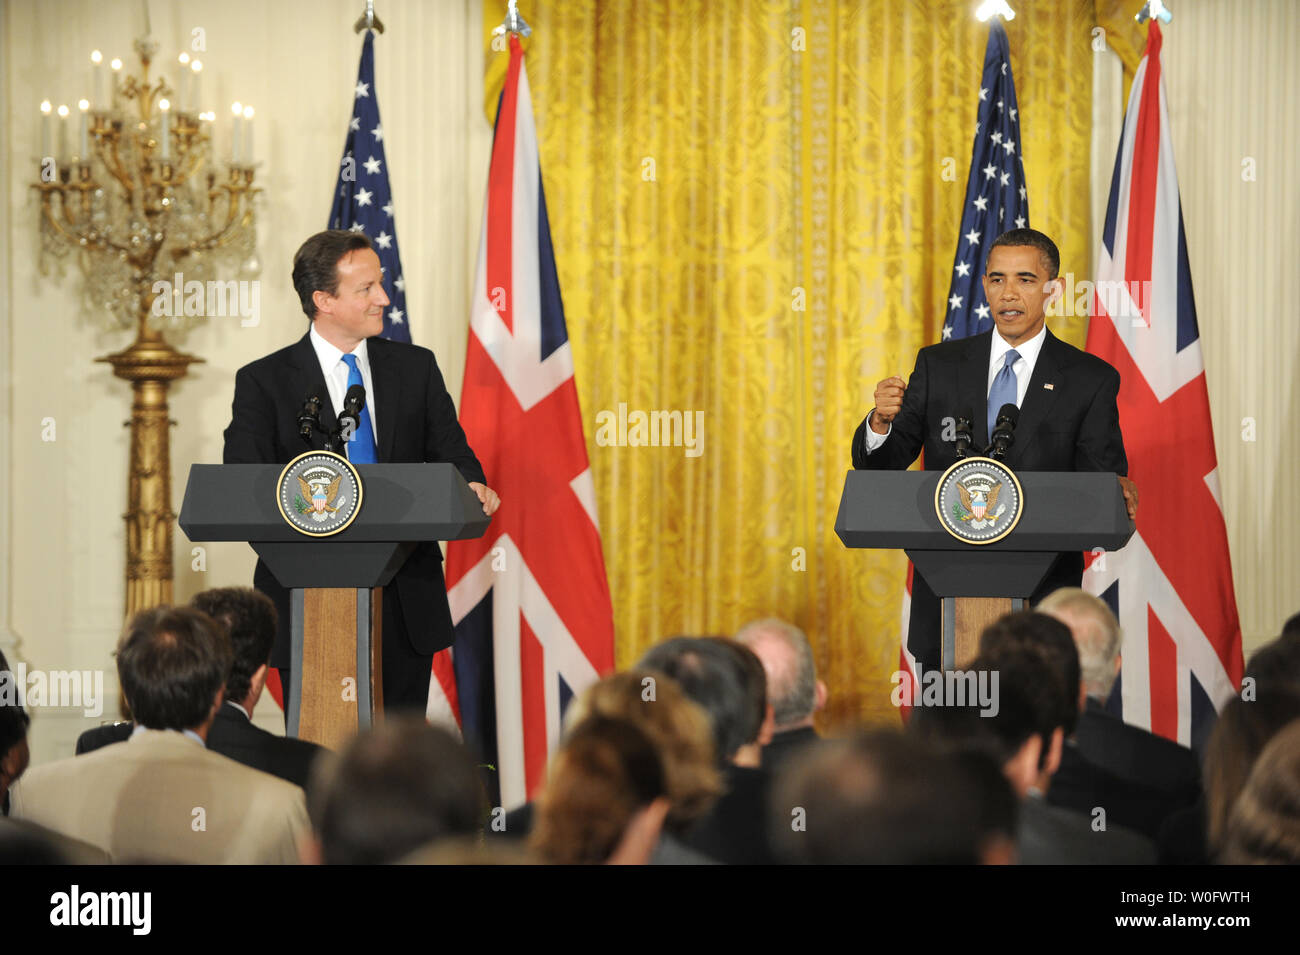 United States President Barack Obama (R) and British Prime Minister David Cameron hold a joint press conference in the East Room of the White House in Washington on July 20, 2010.  Cameron is making his first visit to the United States 10 weeks after taking office.     UPI/Pat Benic Stock Photo